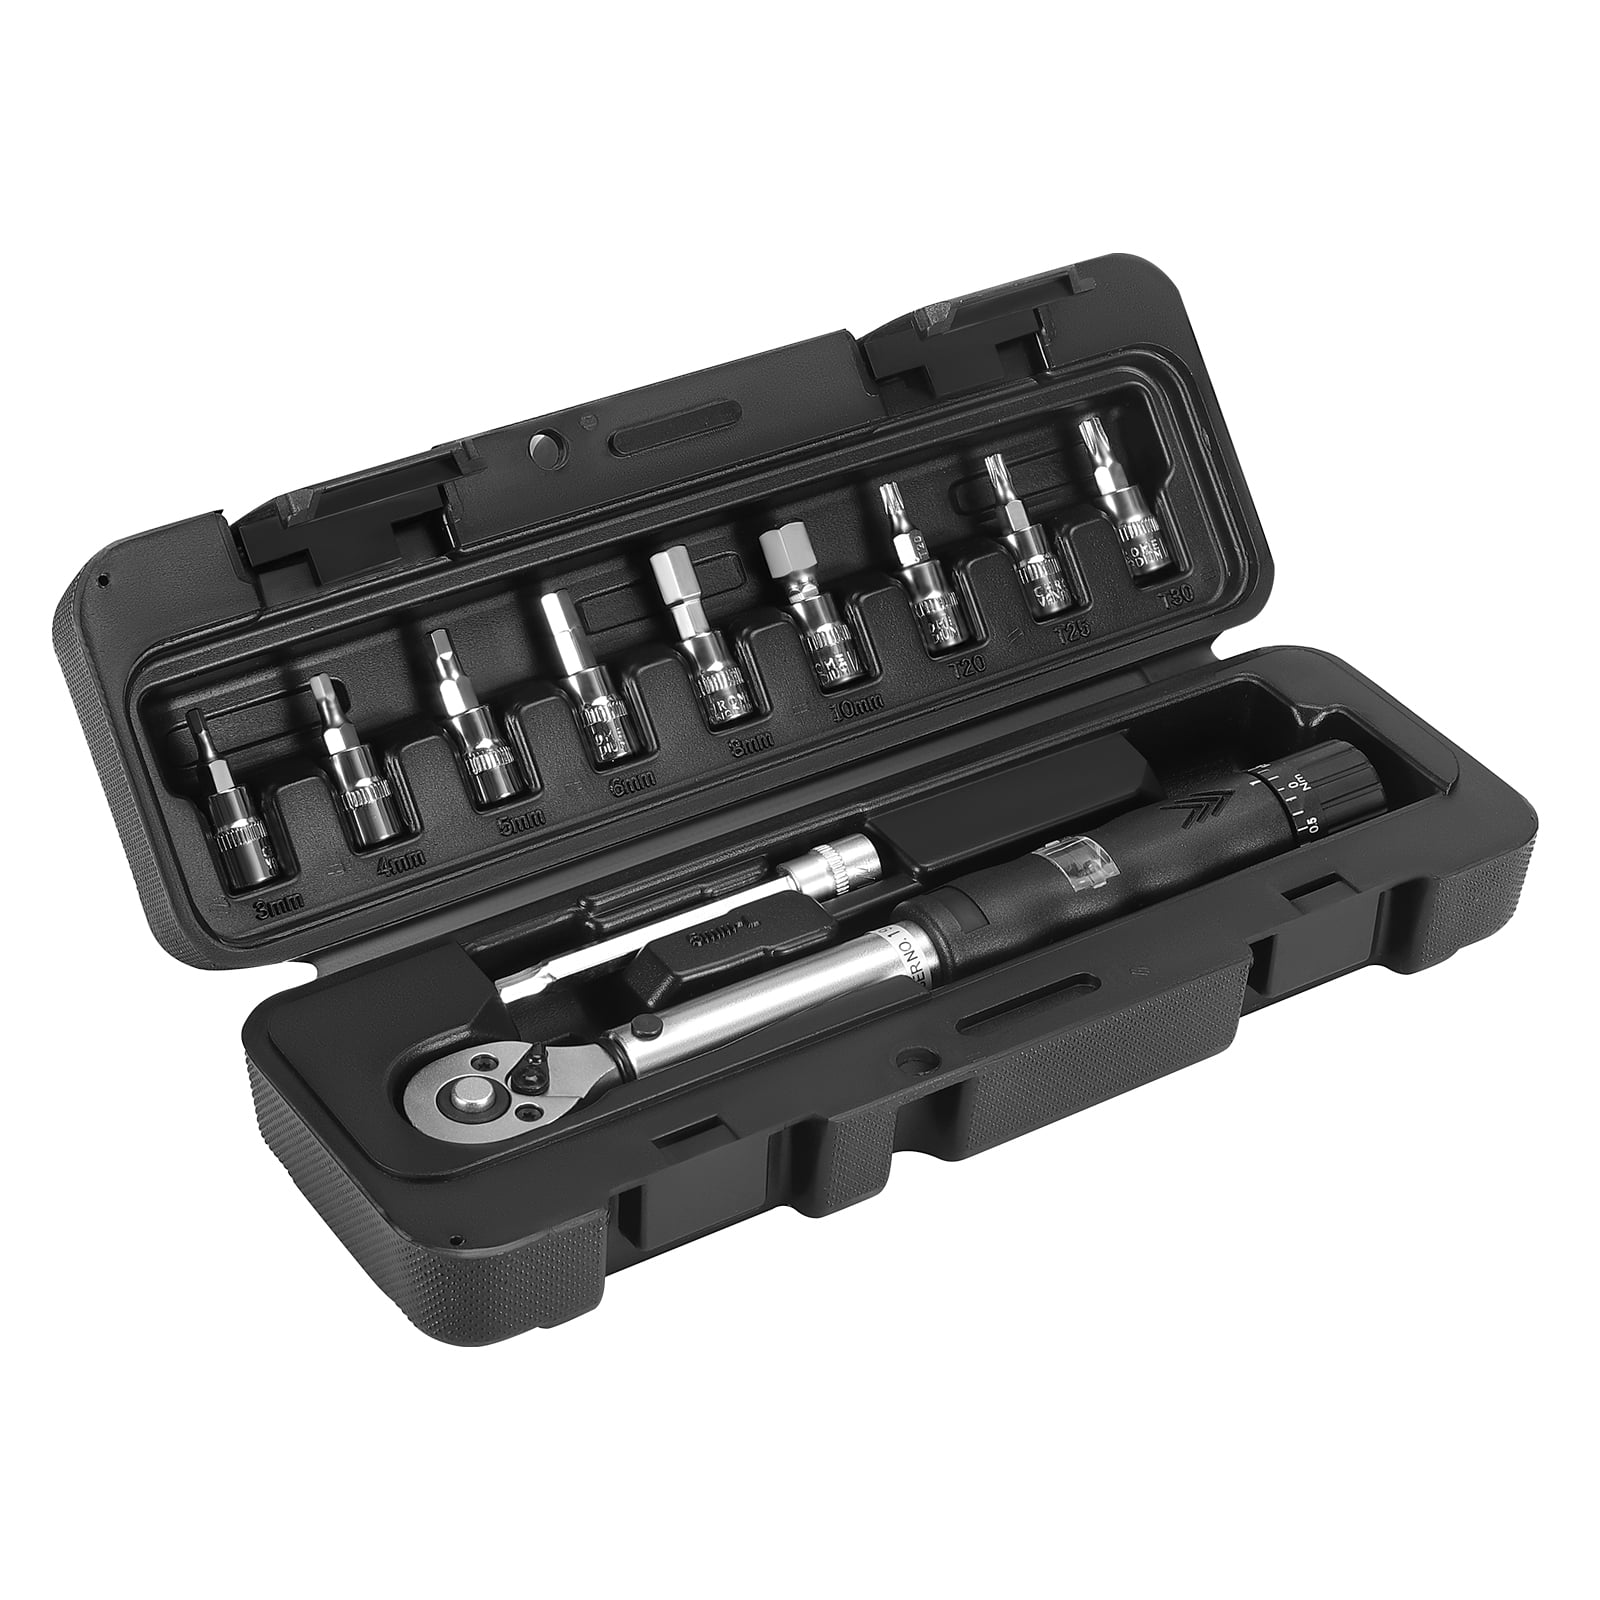 11pcs Torque Wrench 1/4" 2-14Nm Professional Reversible Gauge Torque Wrench US 